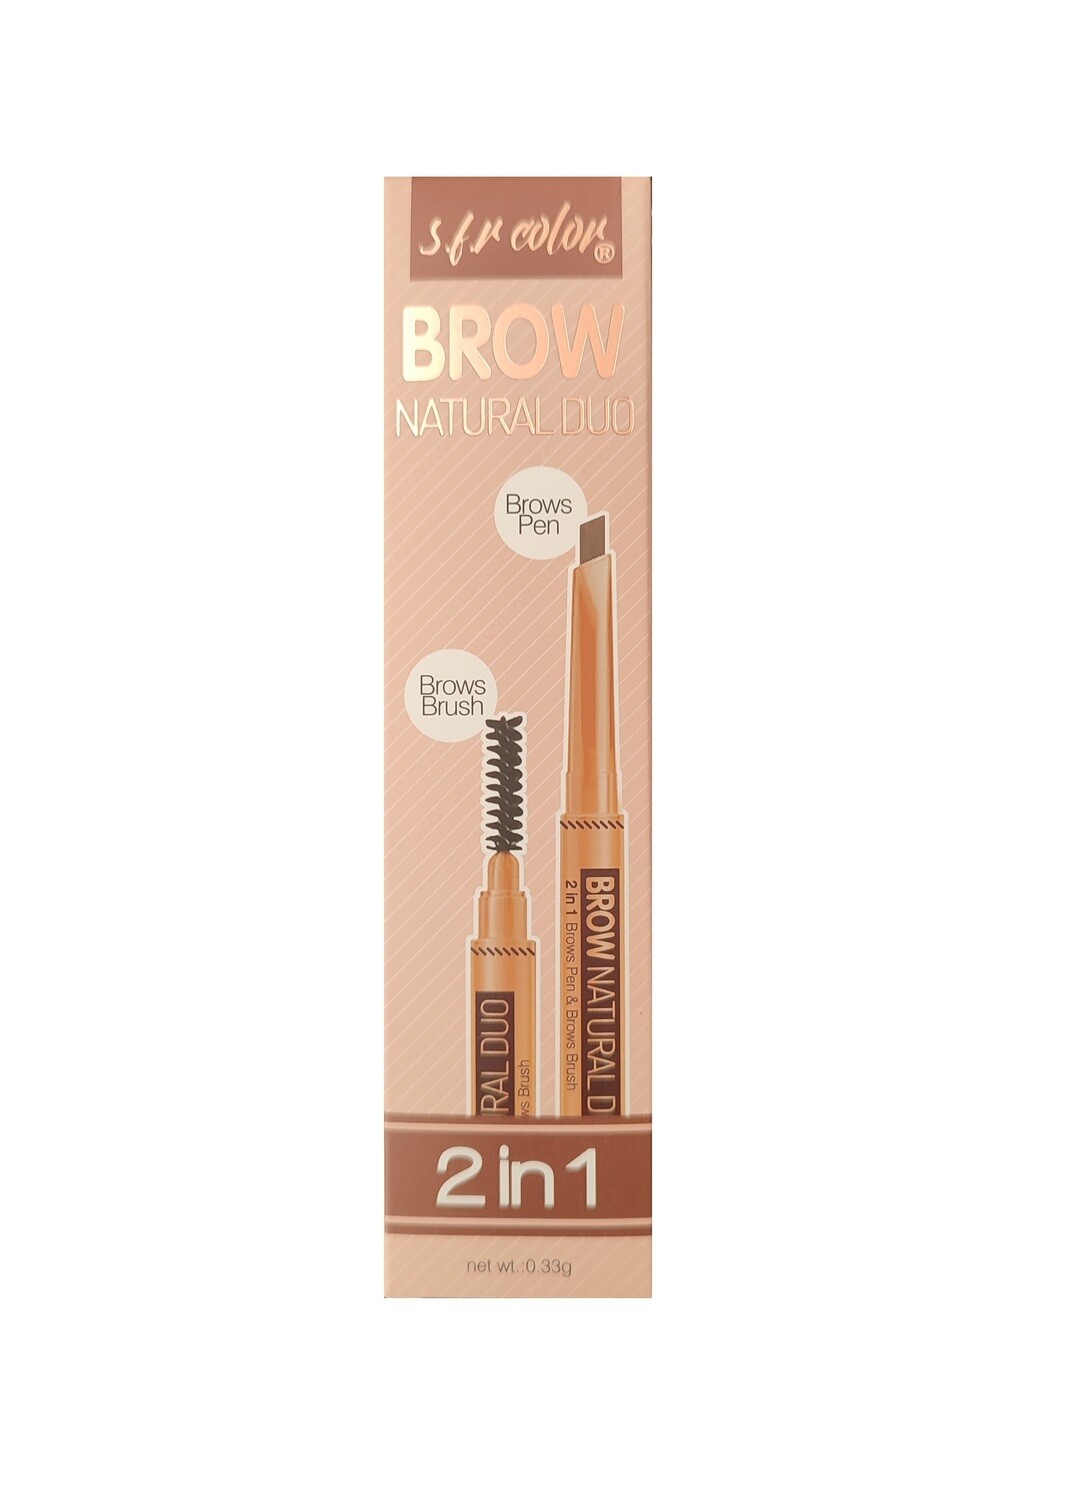 2-in-1 Eyebrow Pencil and Brush, Colour: Light Brown